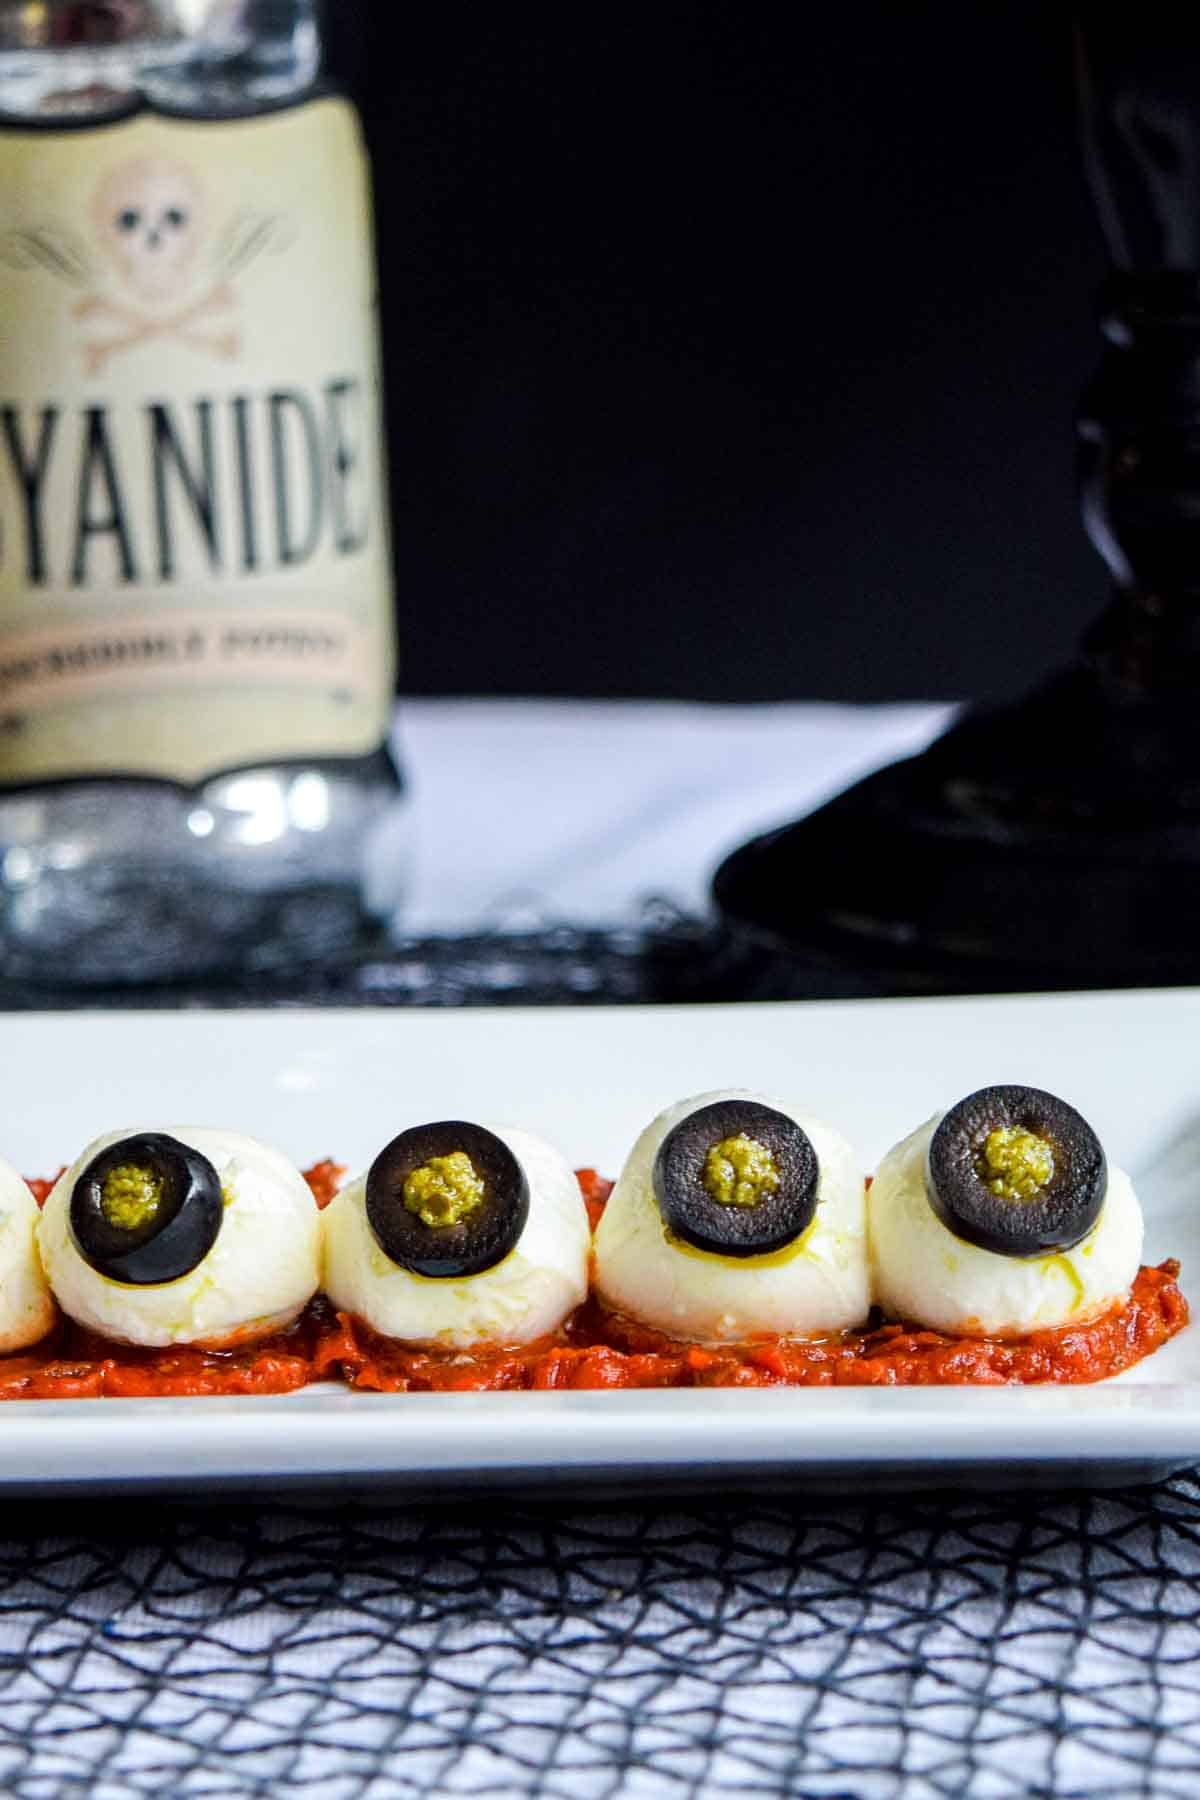 A plate of halloween eyeballs with olives and black olives.